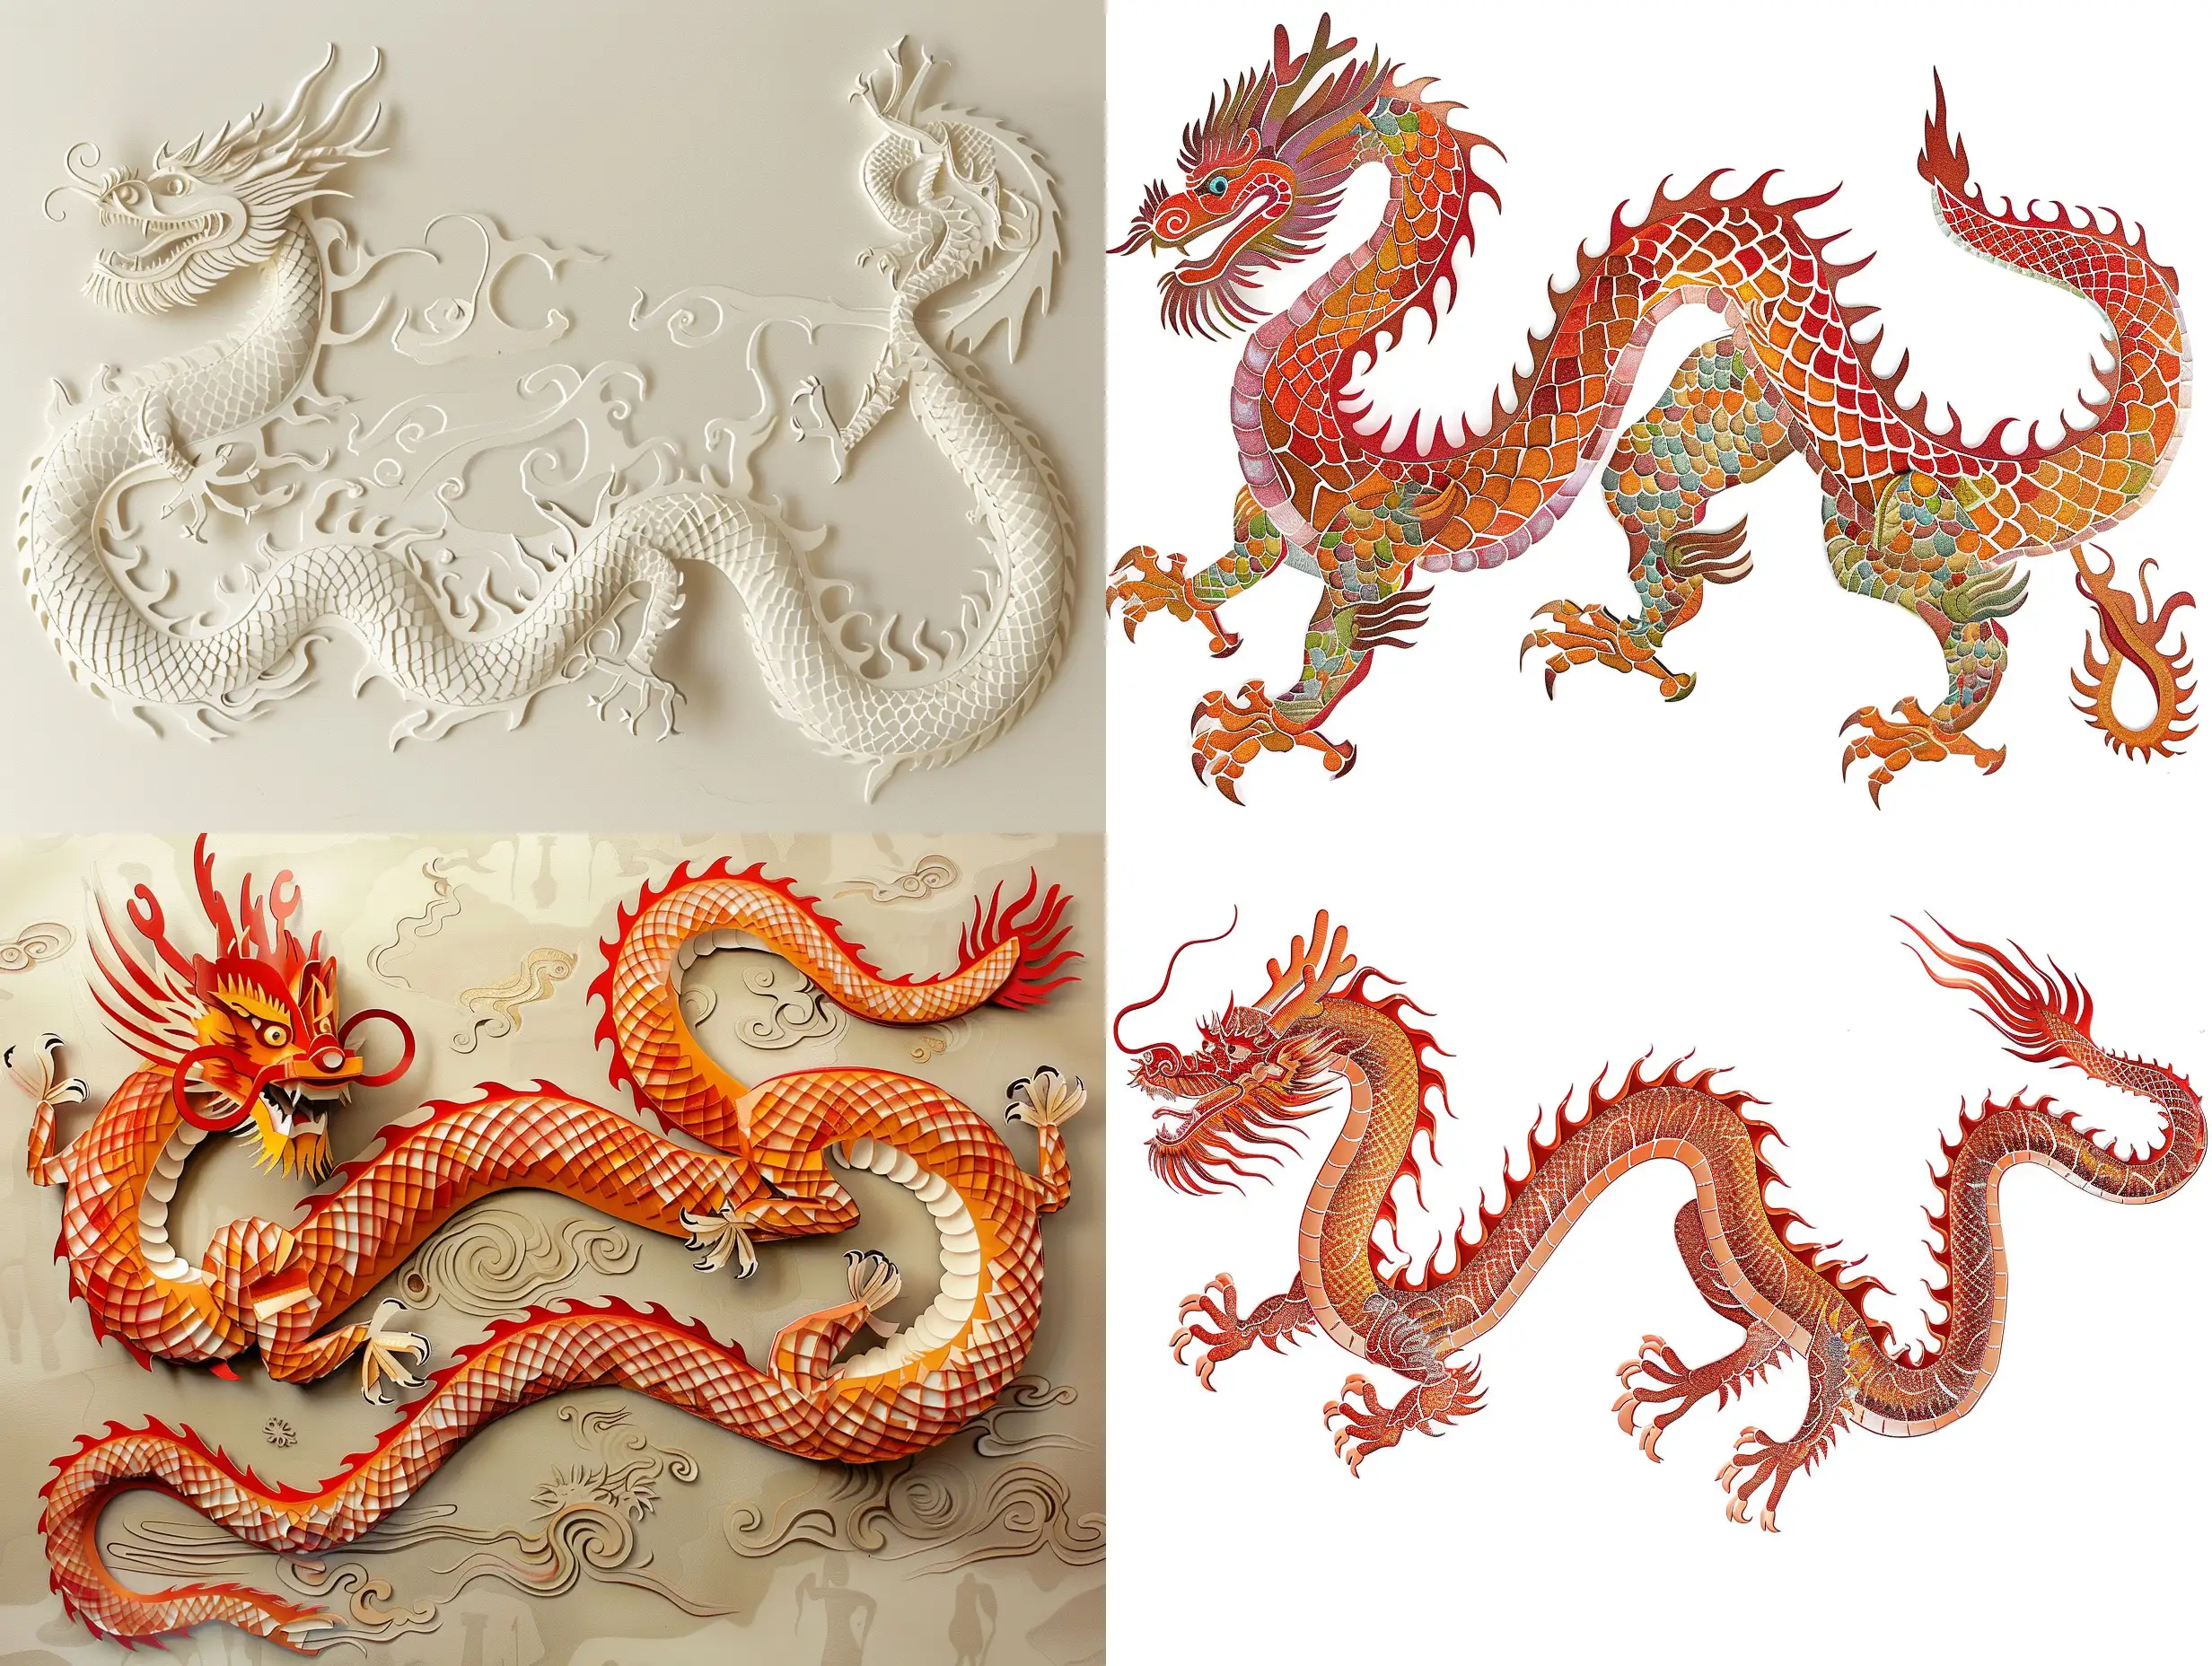 a very long chinese dragon that would fit into a landscape paper, make it cutout